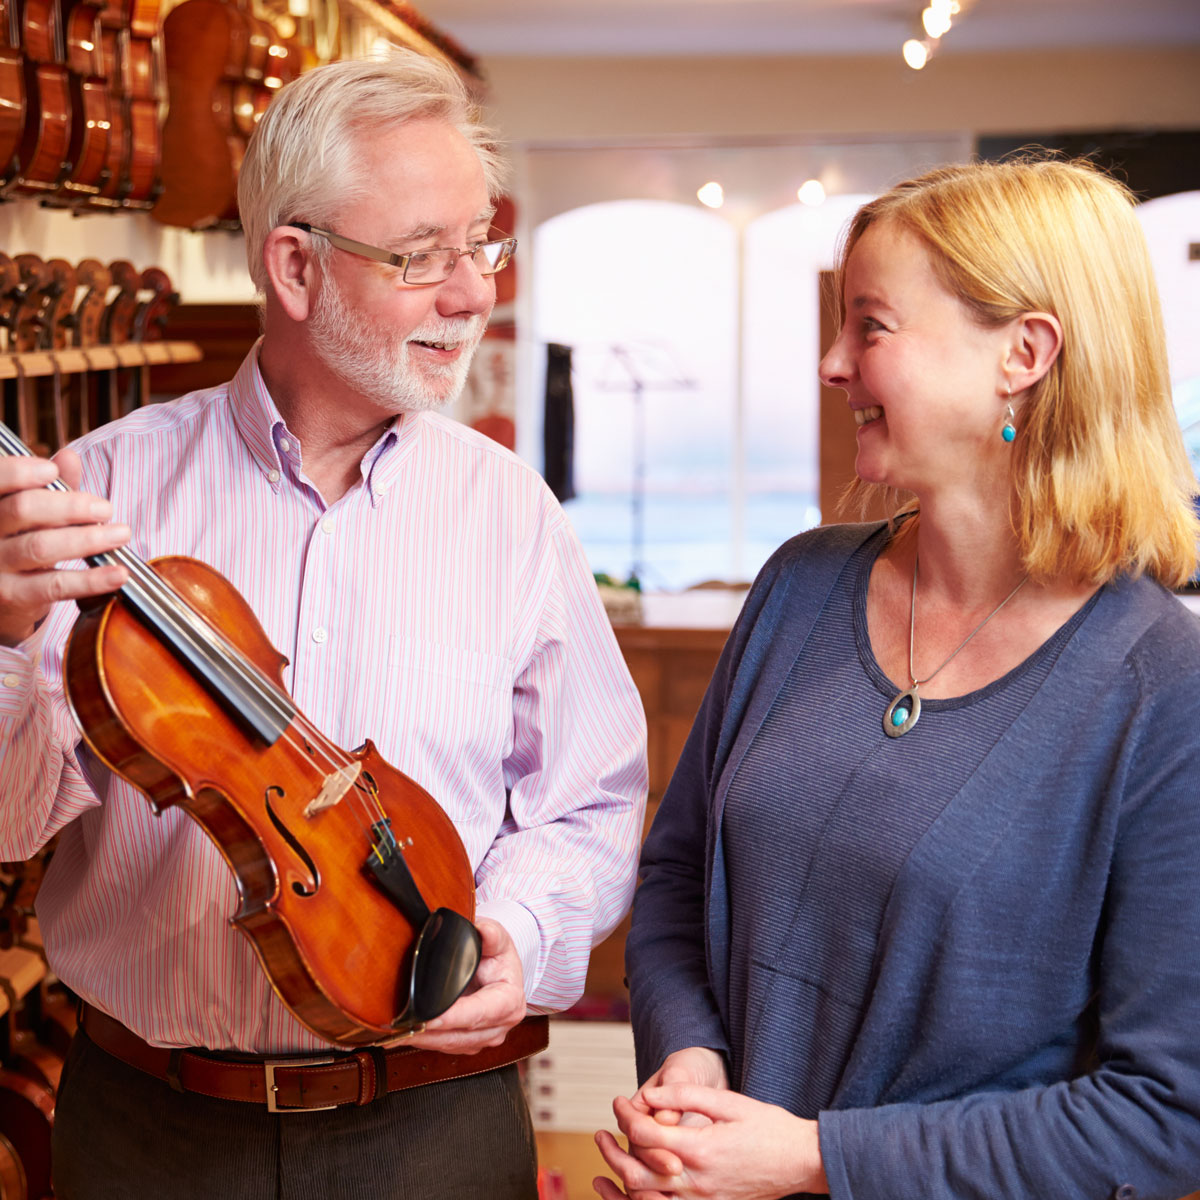 Business owners reviewing musical instrument inventory inside their store